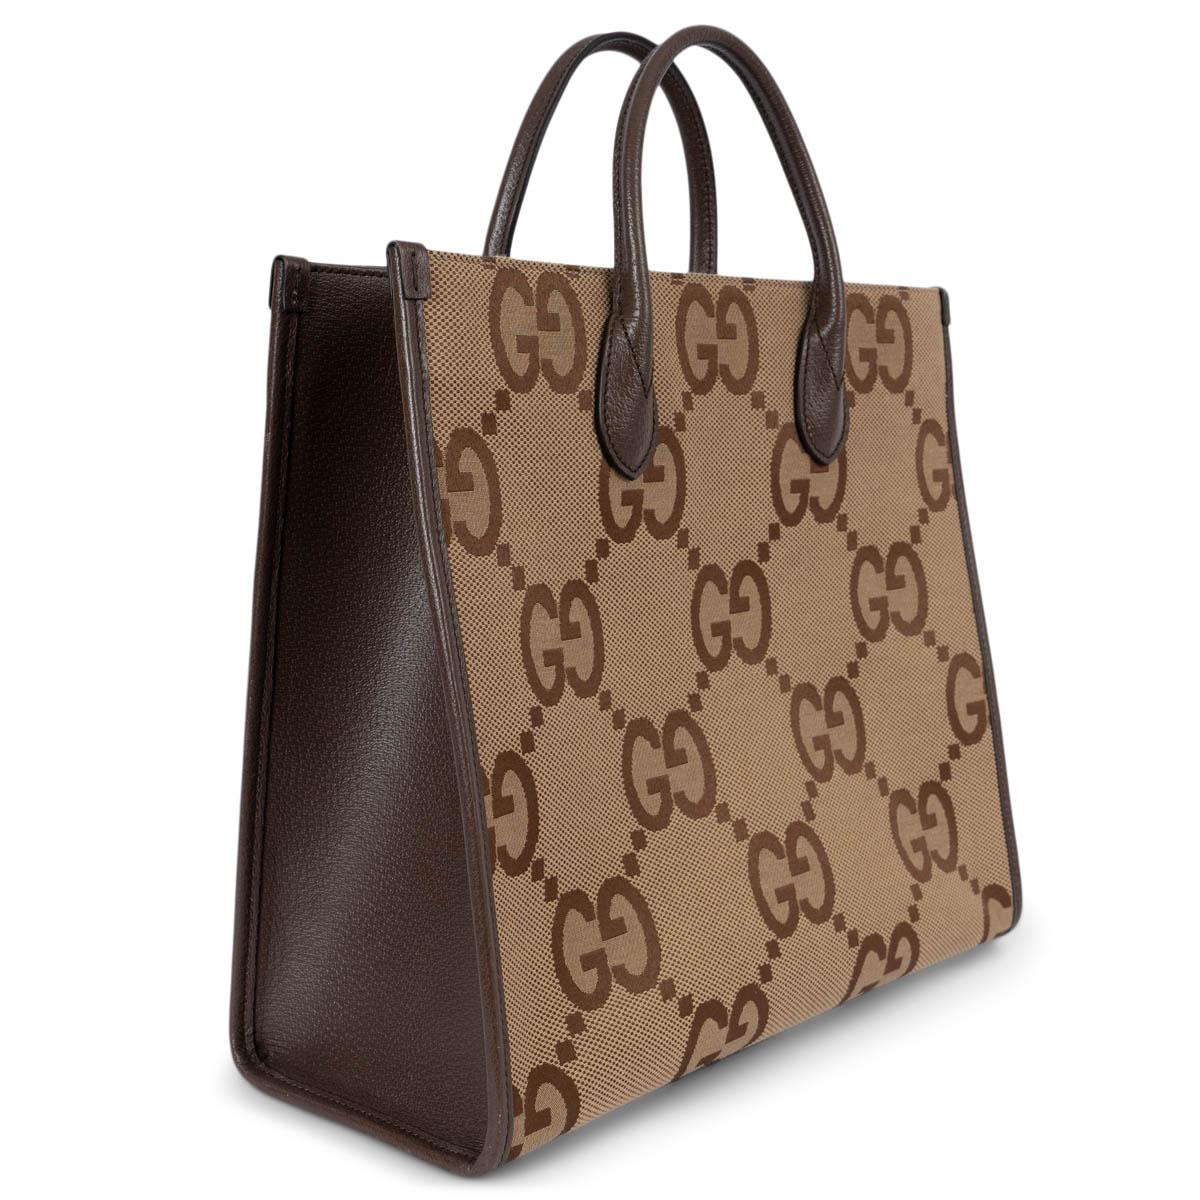 100% authentic Gucci tote in camel and ebony Jumbo GG canvas with dark brown leather trims and gussets. Features an adjustable and detachable green-red web strap. Closes with a dog-hook on top and is lined in canvas with a zipper pocket against the